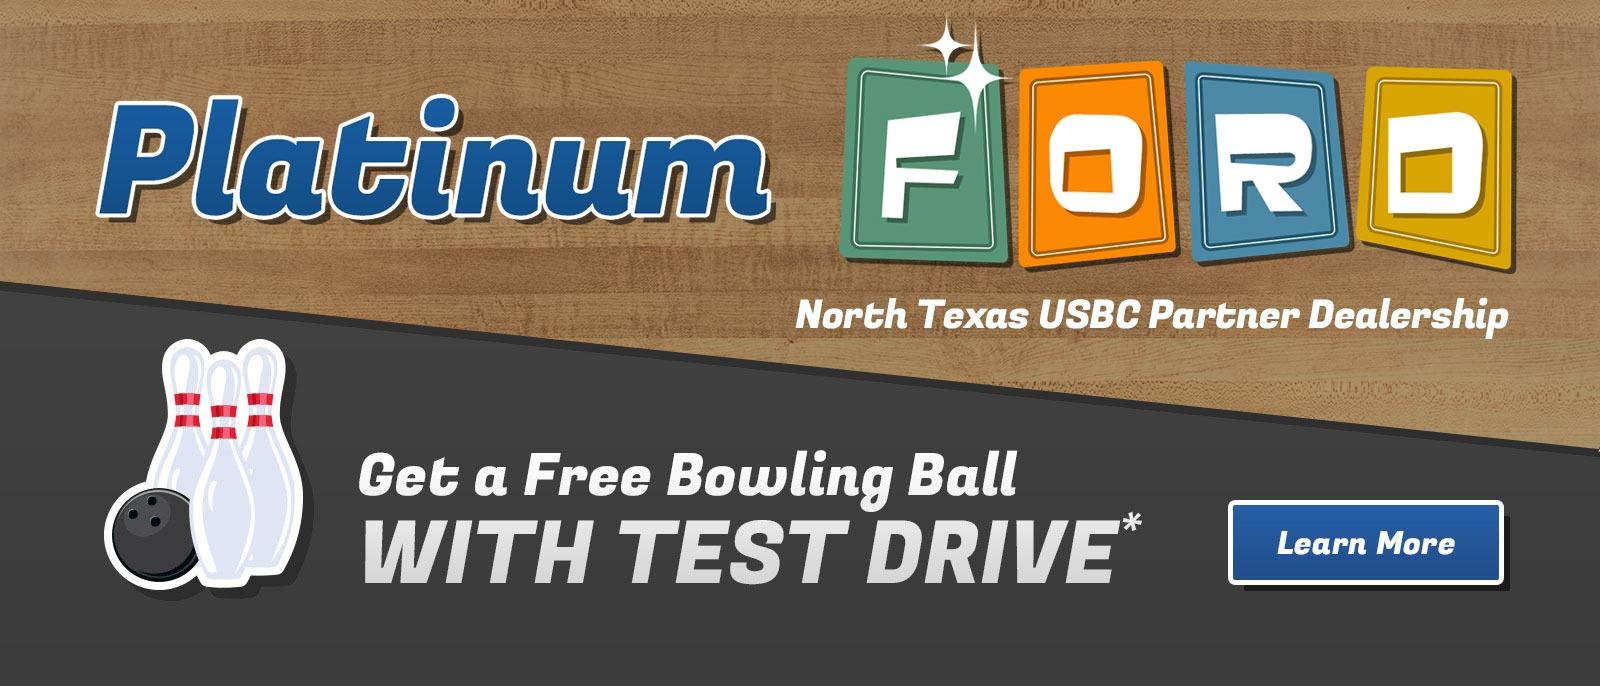 Get a Free Bowling Ball with a Test Drive!